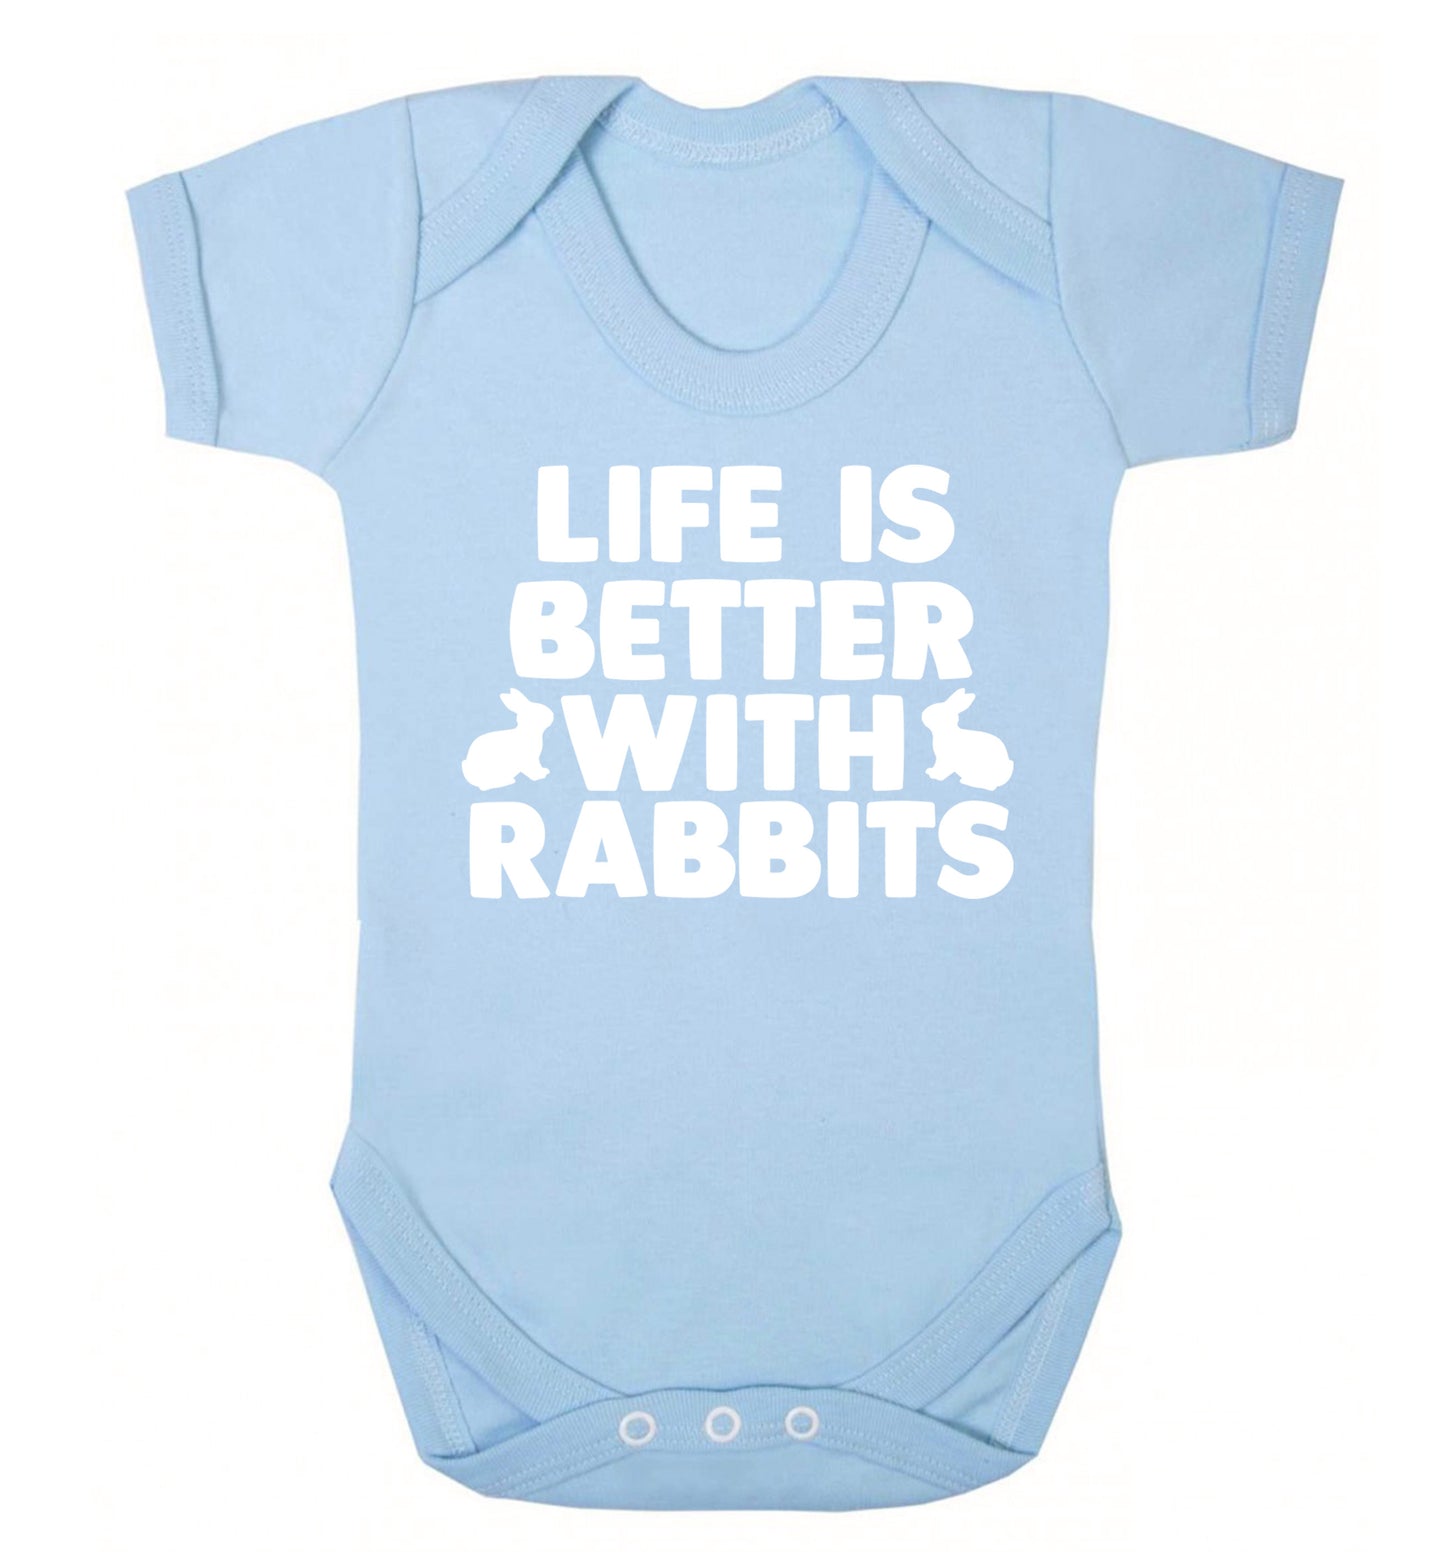 Life is better with rabbits Baby Vest pale blue 18-24 months